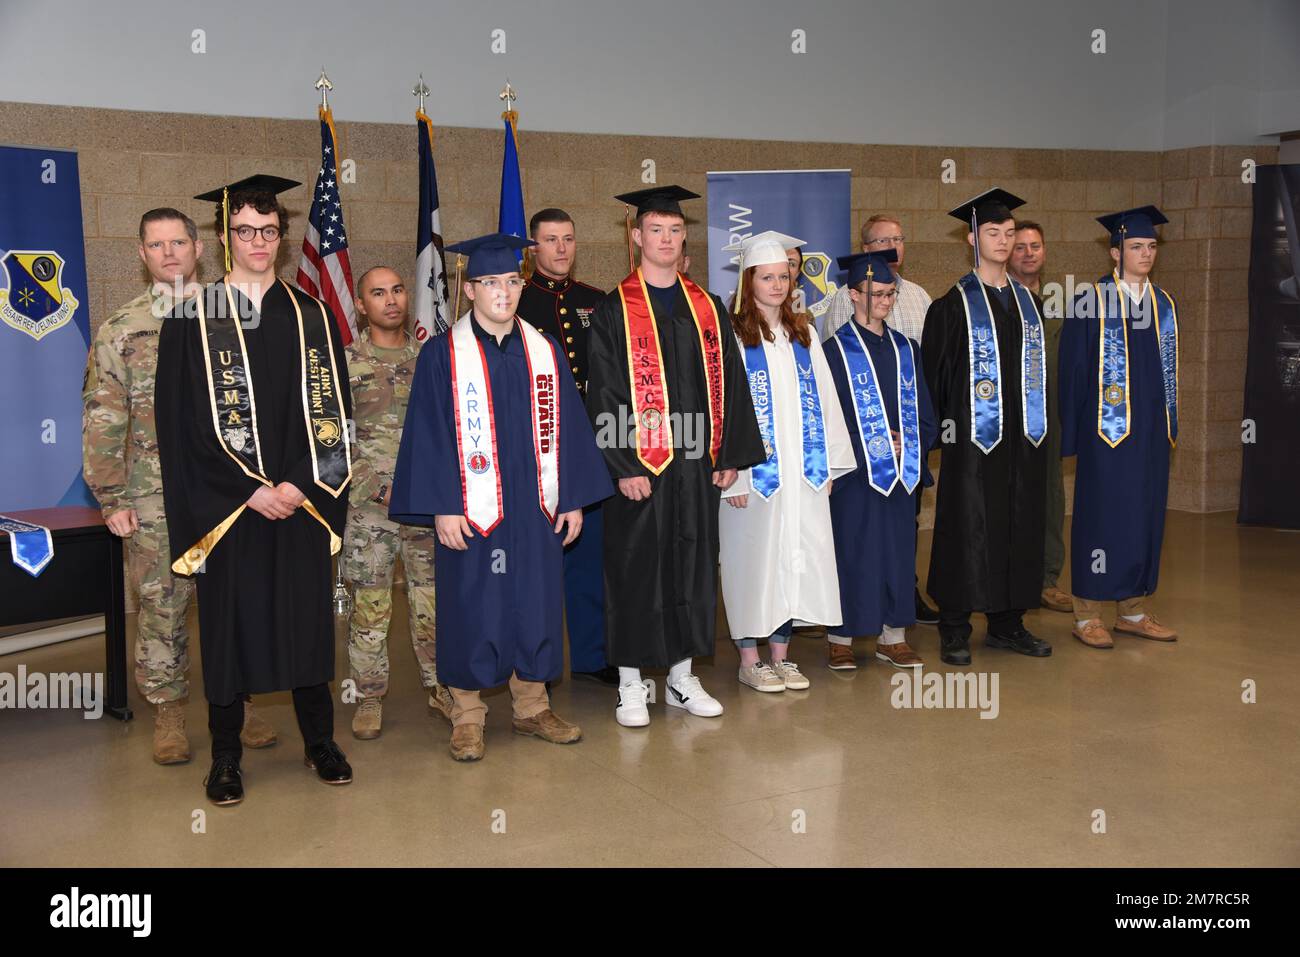 Graduating high school students from the Sioux City, Iowa area who are headed for military service display special military related graduation stoles at an unveiling event in Sioux City, Iowa on May 12, 2022. The stoles were created to honor students who have been accepted to one of the military service academies, enlisted into an active duty component or joined a component of the Reserve or National Guard.    U.S. Air National Guard photo Senior Master Sgt. Vincent De Groot Stock Photo